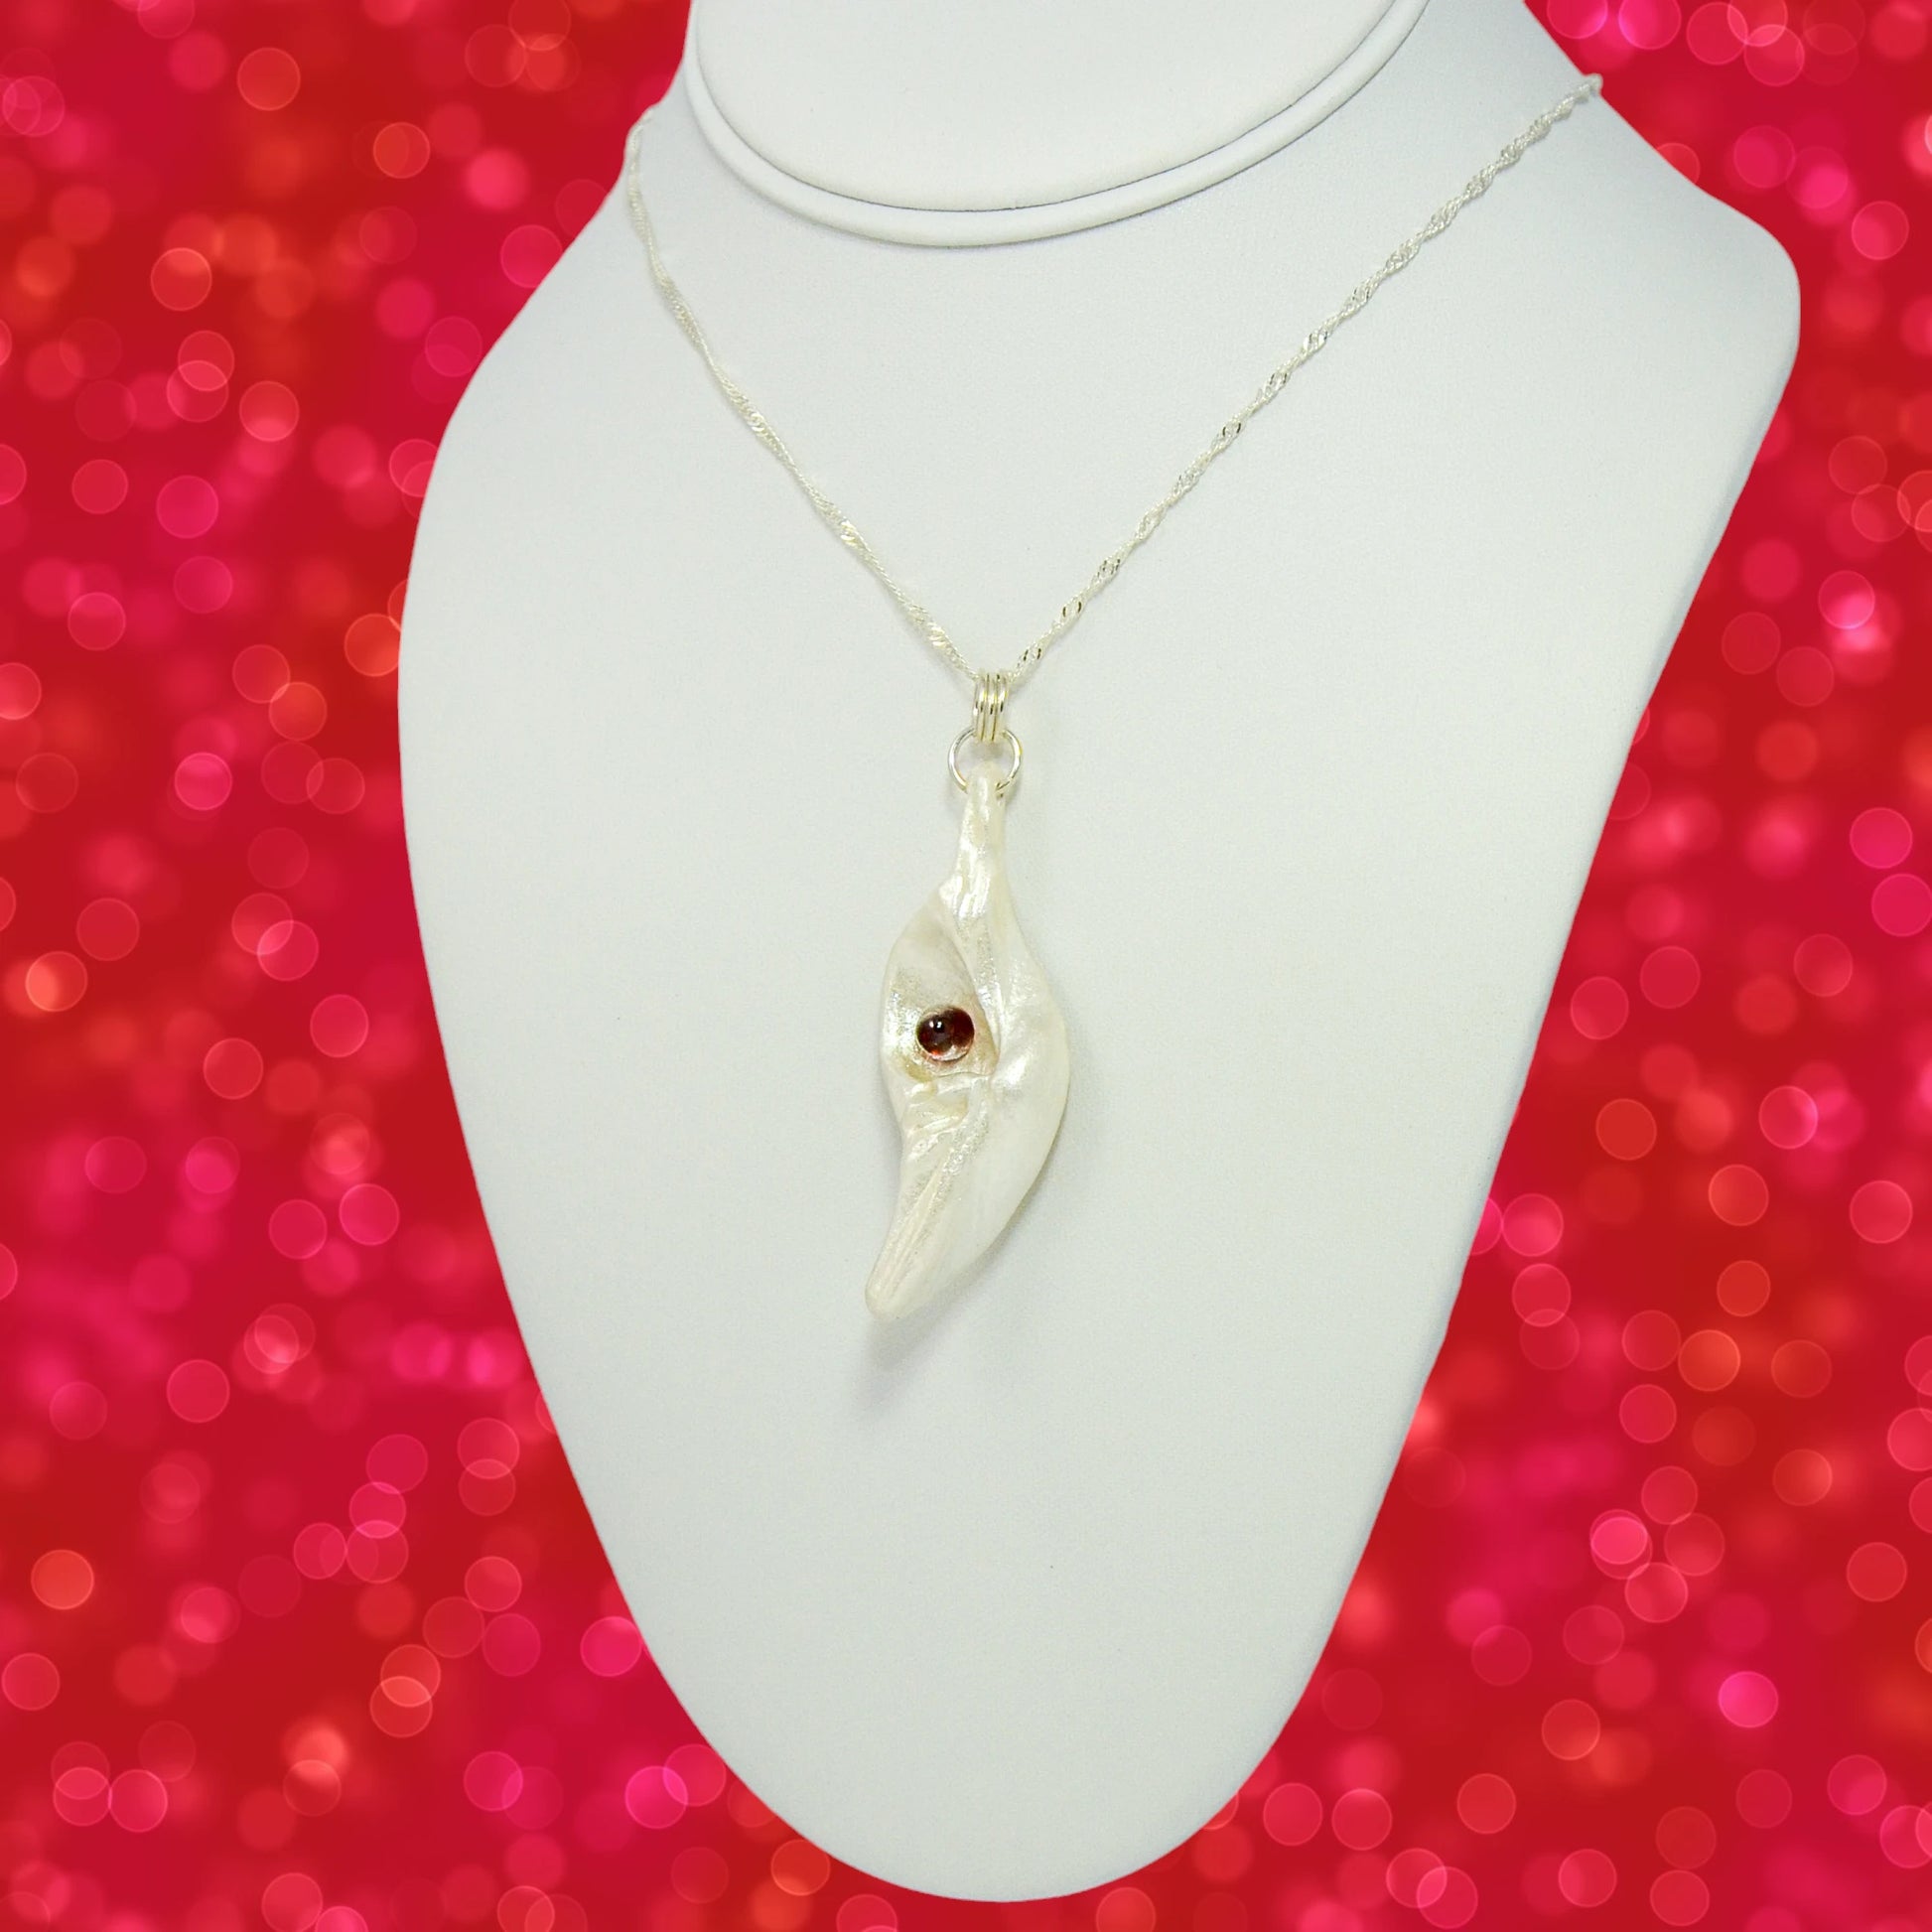 Pomegranate natural seashell pendant is adorned with a stunning Garnet gemstone. The pendant is turned so the viewer can see the left side of the pendant.